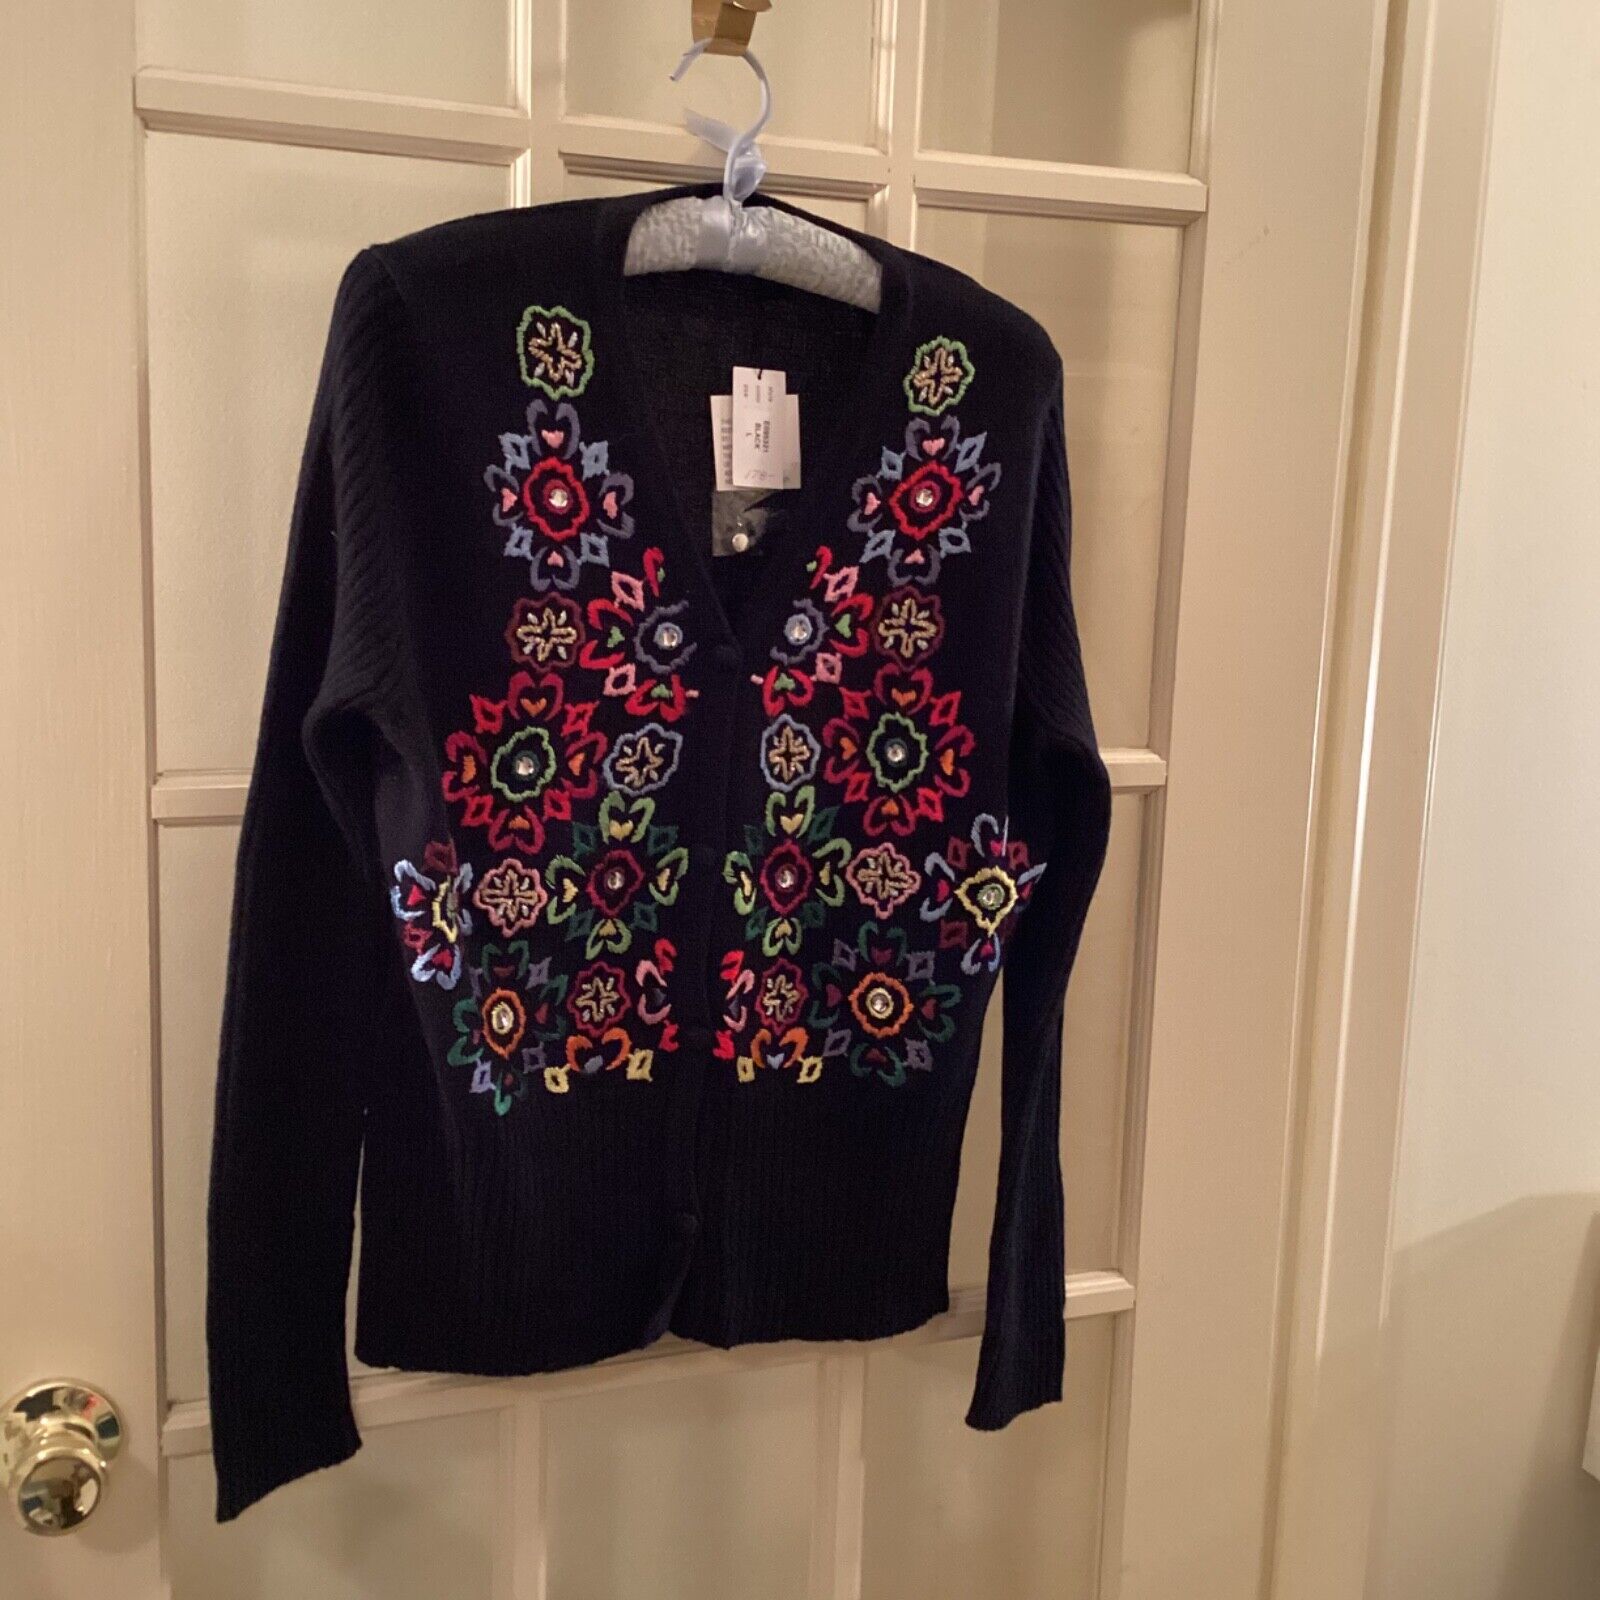 MICHAEL SIMON EMBROIDERED SWEATER. BLACK. LARGE.